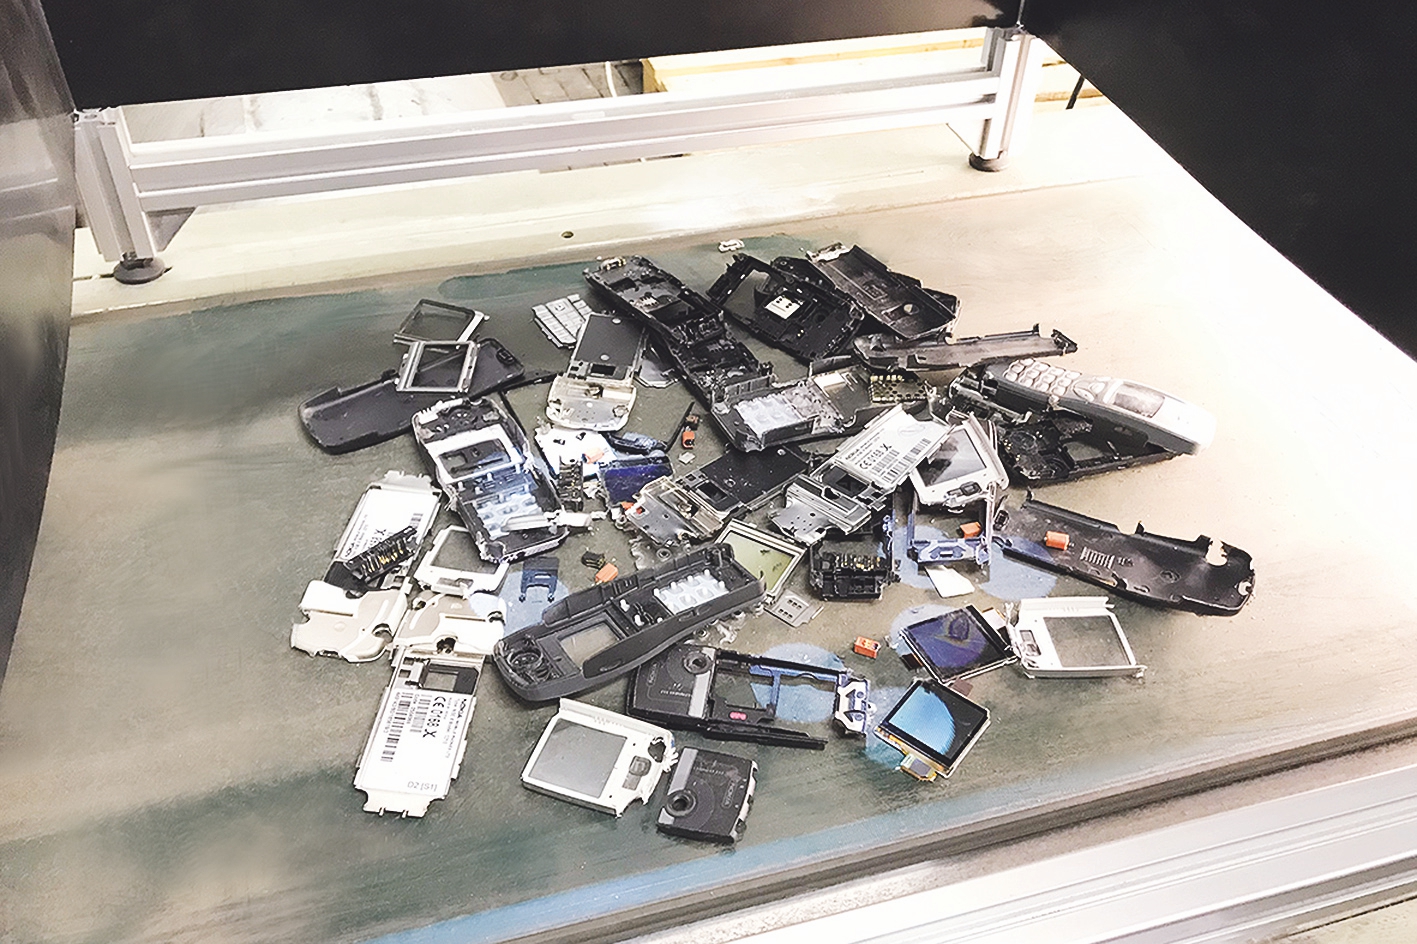 Successful recycling in the ADIR project led by Fraunhofer ILT: by disassembling around 1000 mobile phones and over 800 printed circuit boards, the researchers sorted several kilograms of components for recovery of valuable metals.